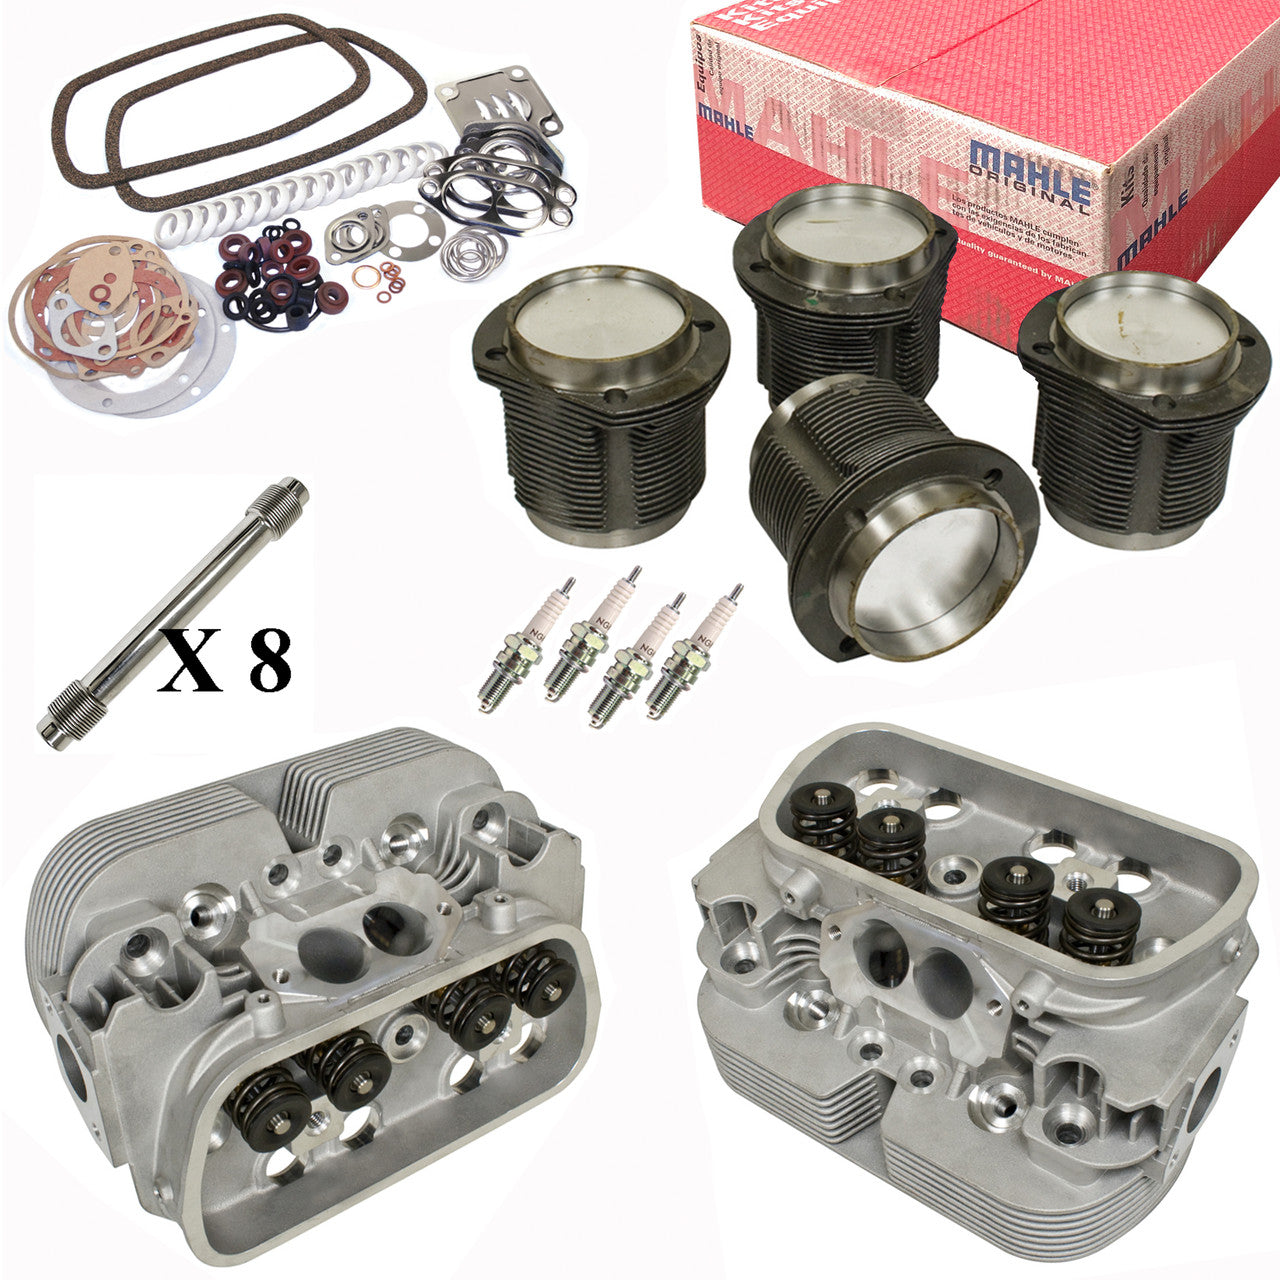 Vw Bug Engine Kit Hi Performance 1835cc With Racing Cylinder Heads Top End Only, Mahle Pistons